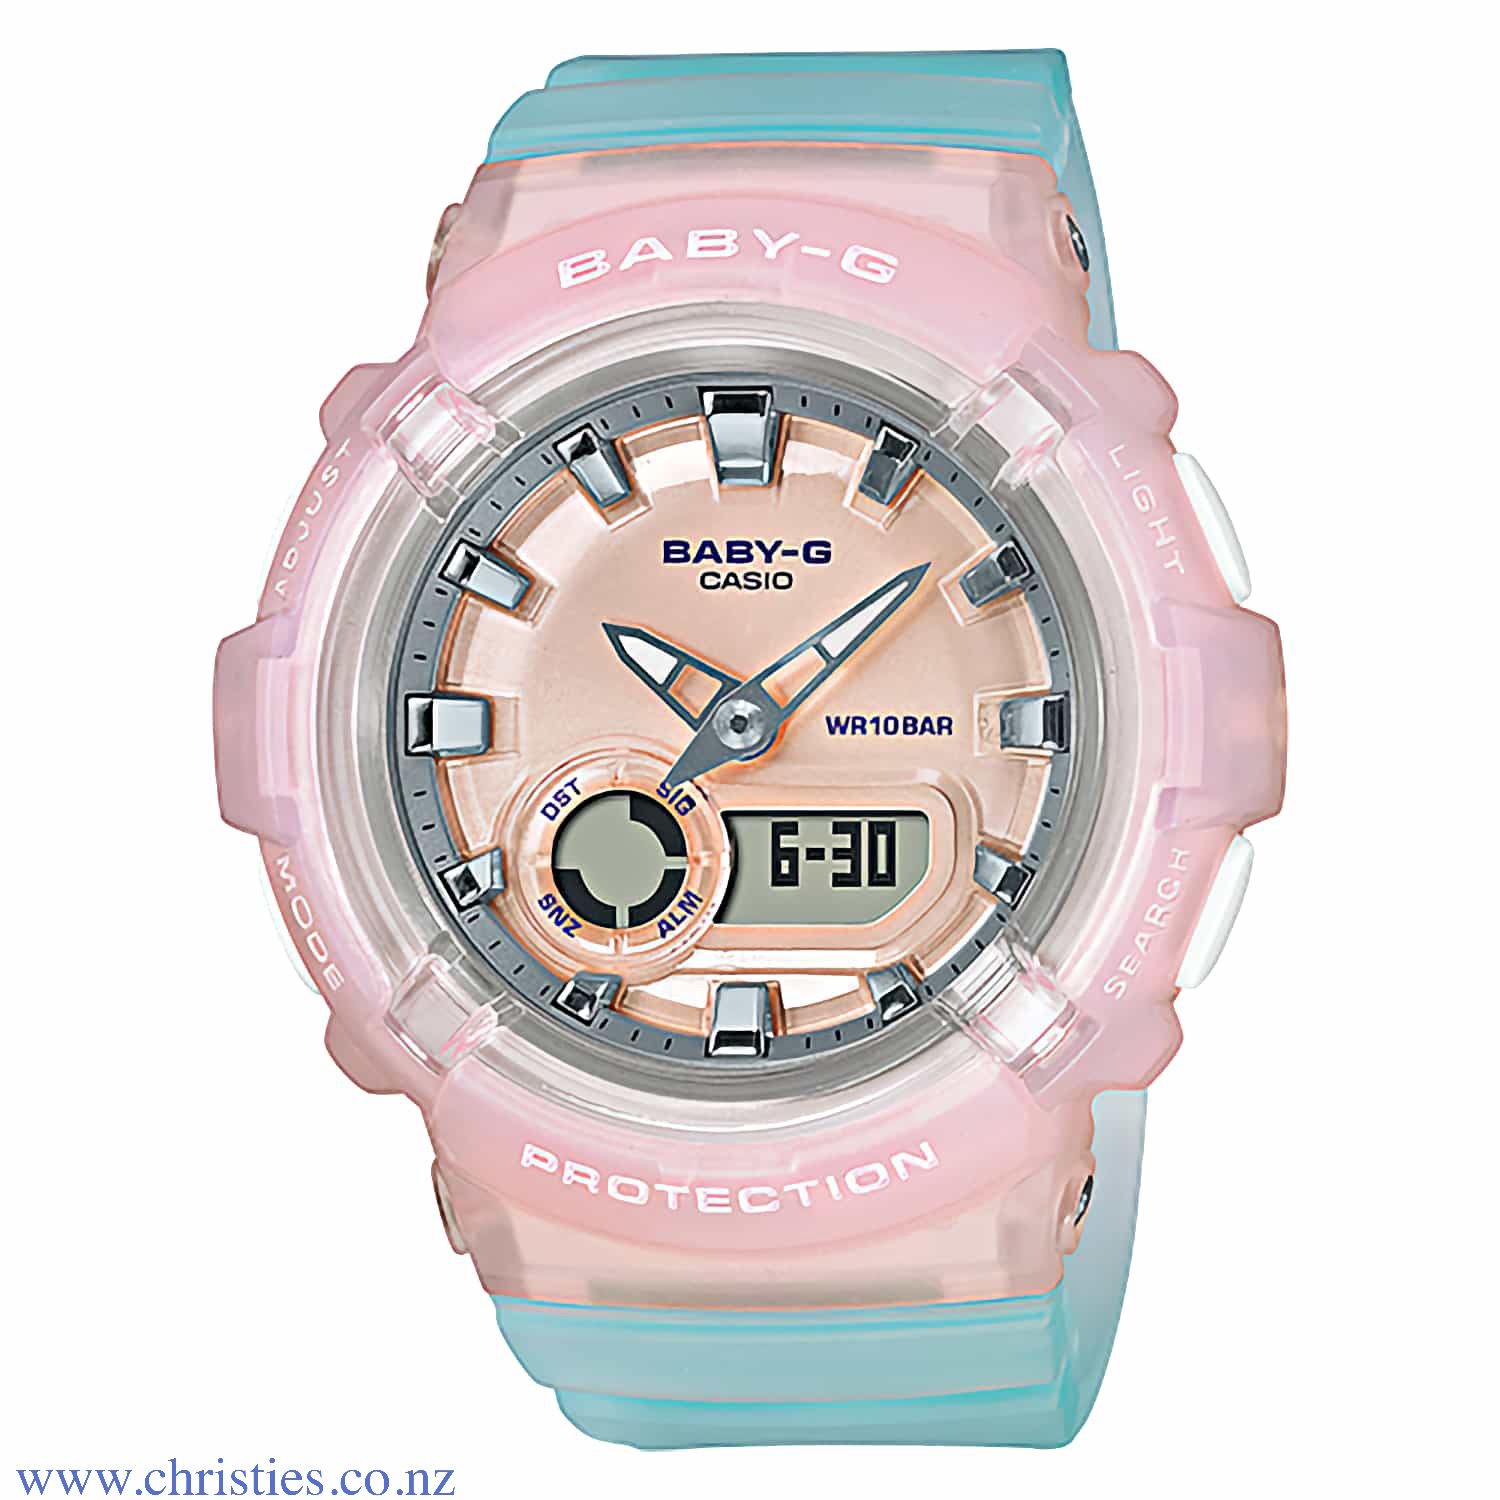 BGA280-4A3 Casio Baby-G Watch. The BGA-280 Series layers multiple parts to create innovative and colourful designs. The round cases of these models and the cute impression of their hefty forms are complemented by the sporty touch of the metallic hou baby-